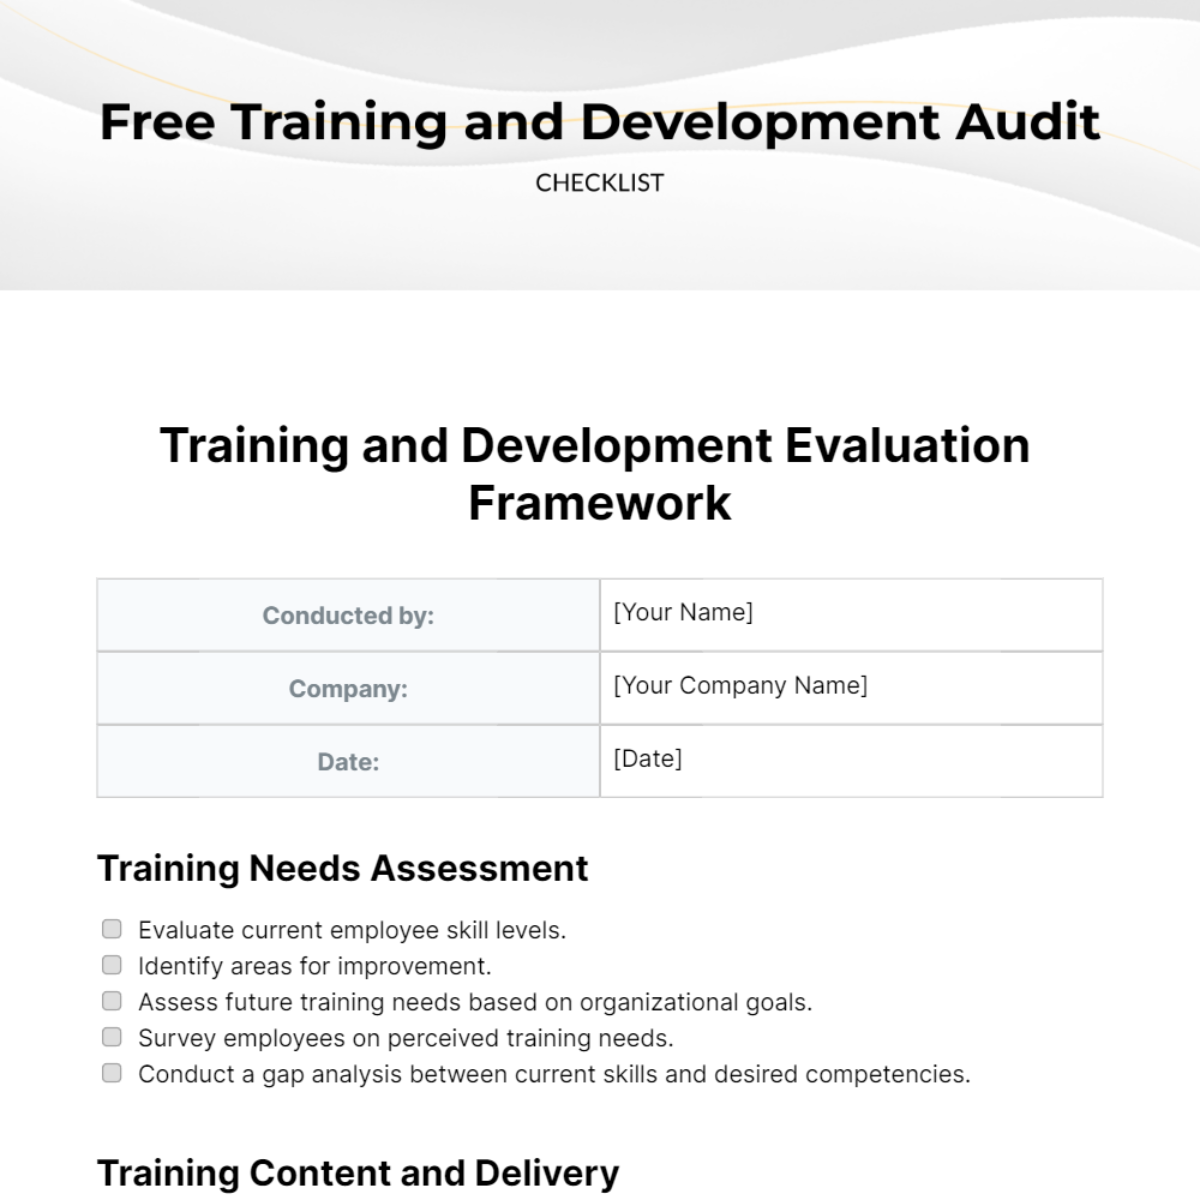 Free Training and Development Audit Checklist Template